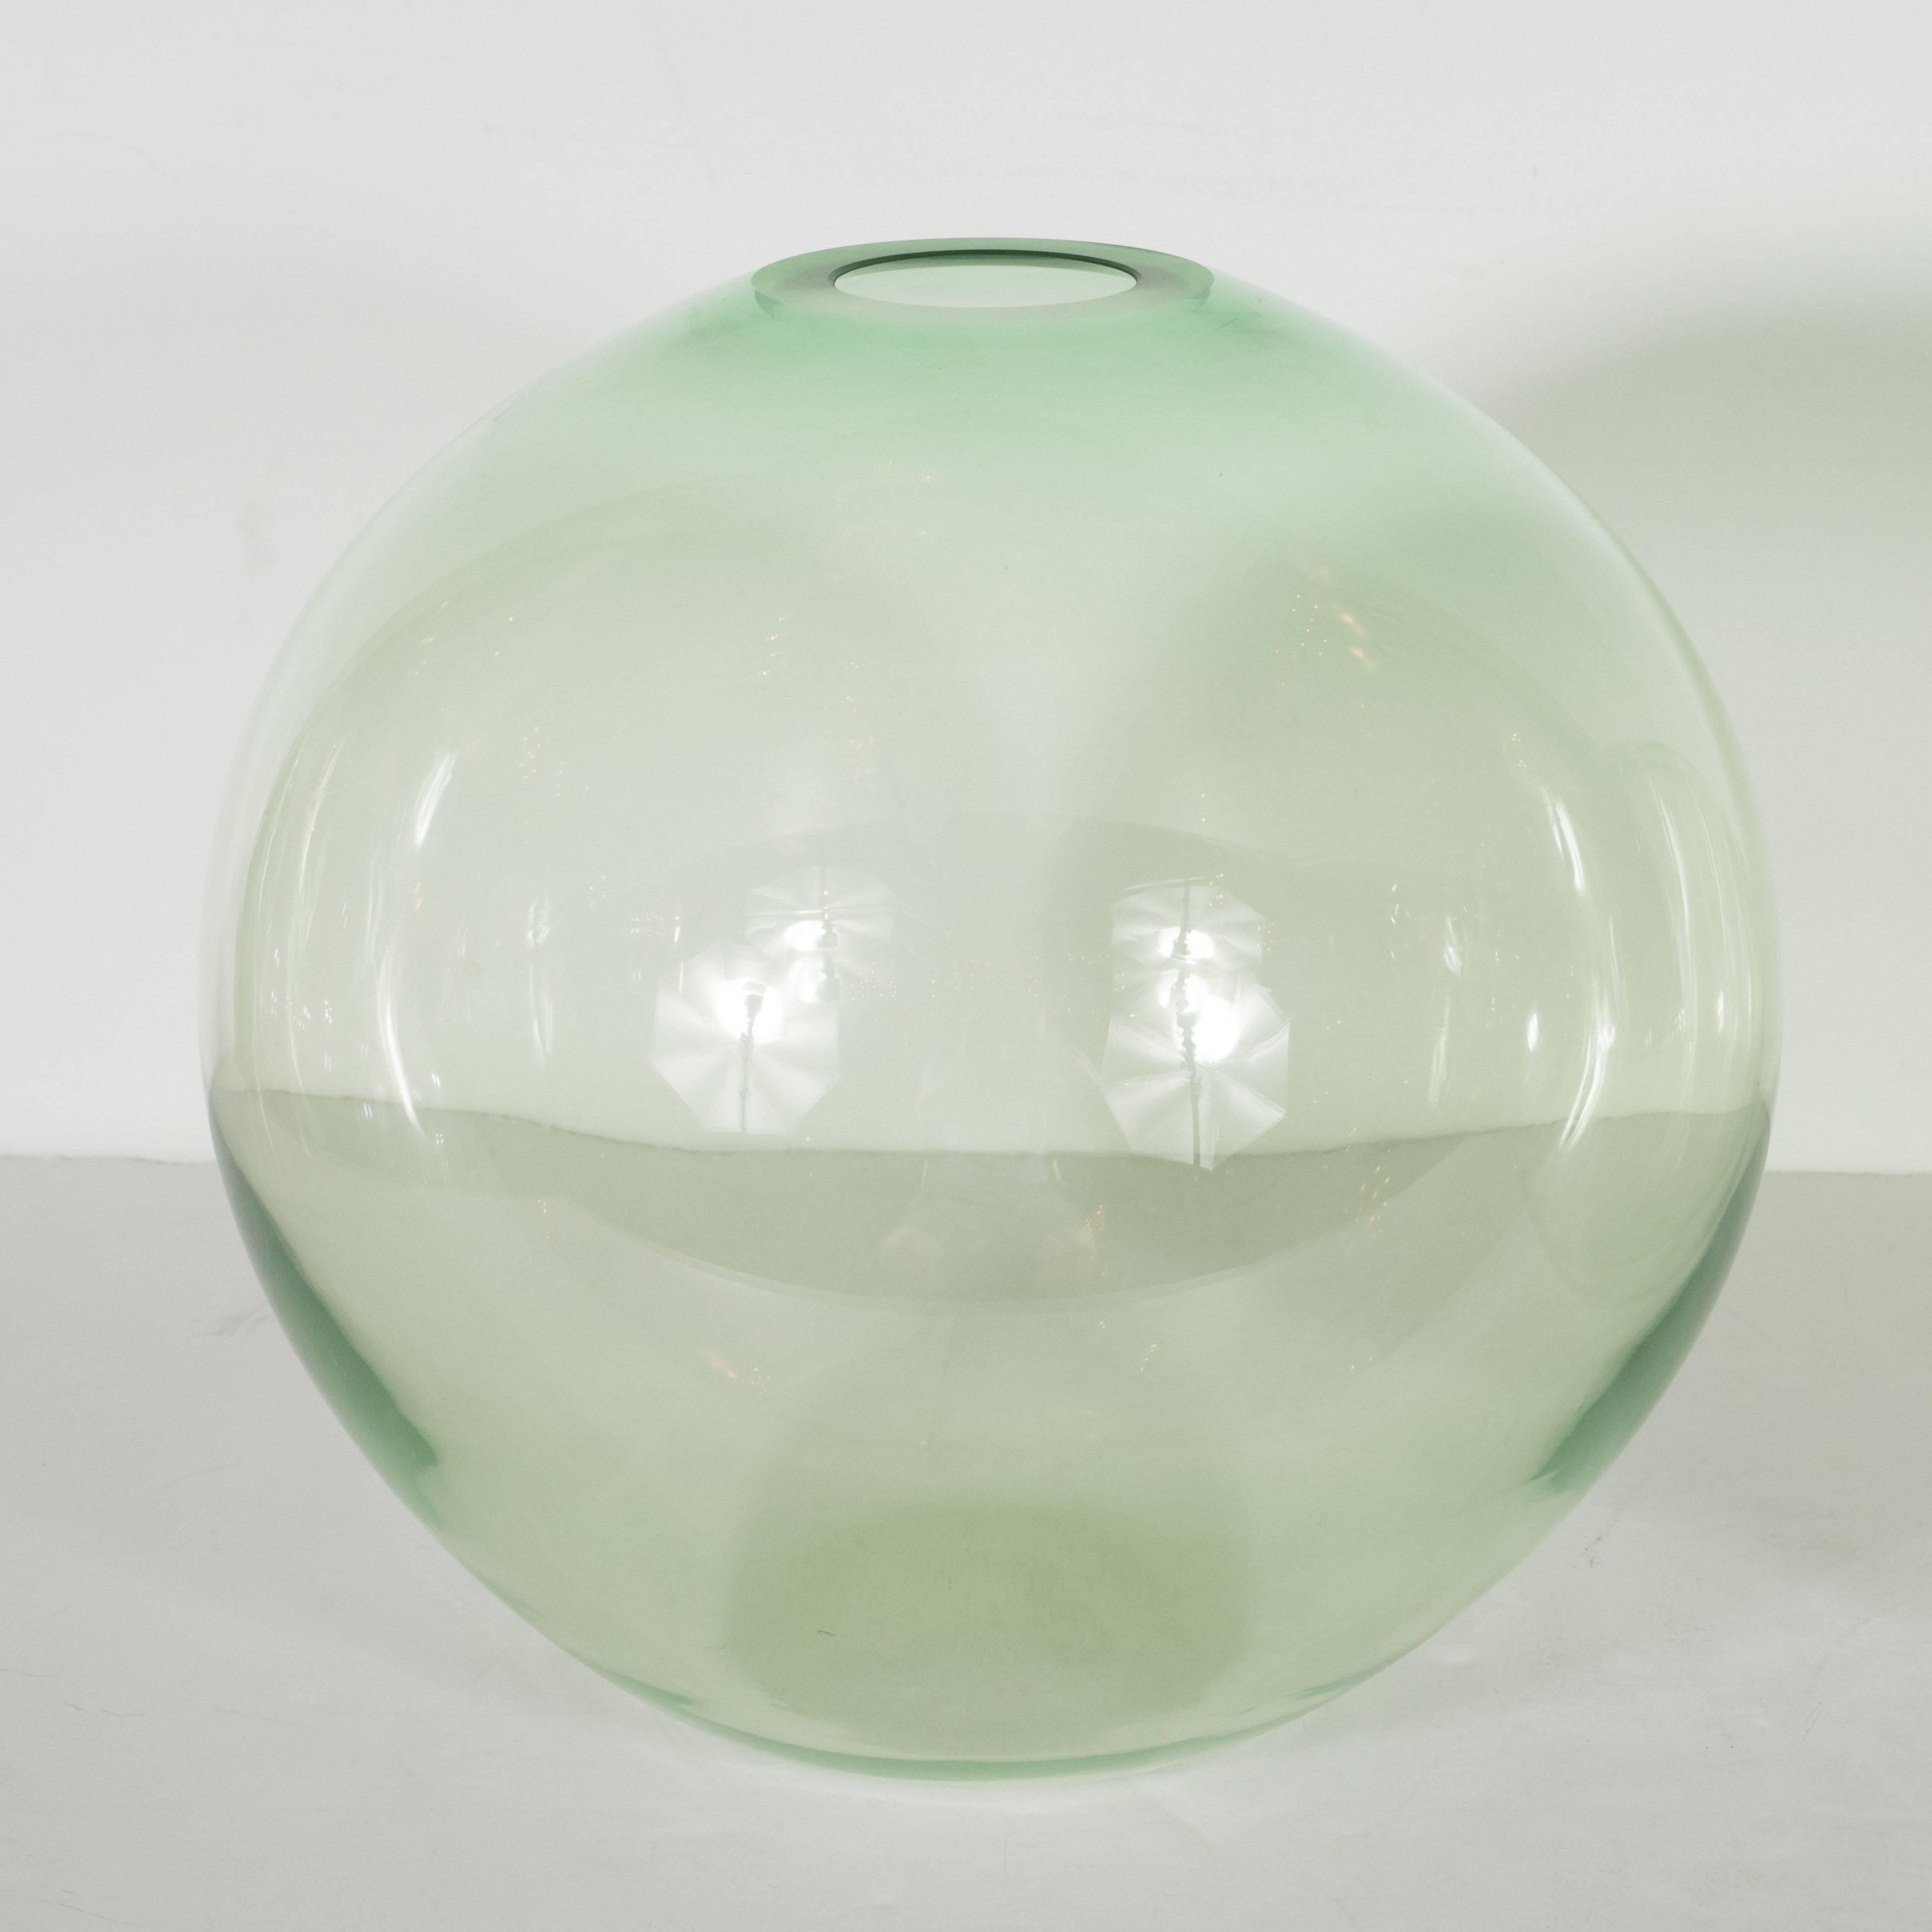 This pair of globular vases have been hand blown by the esteemed Brooklyn based artist Nick Leonoff in an emerald hue of translucent glass. With their radiant palate and organic forms, they are perfect as functional vases for presenting flowers, and